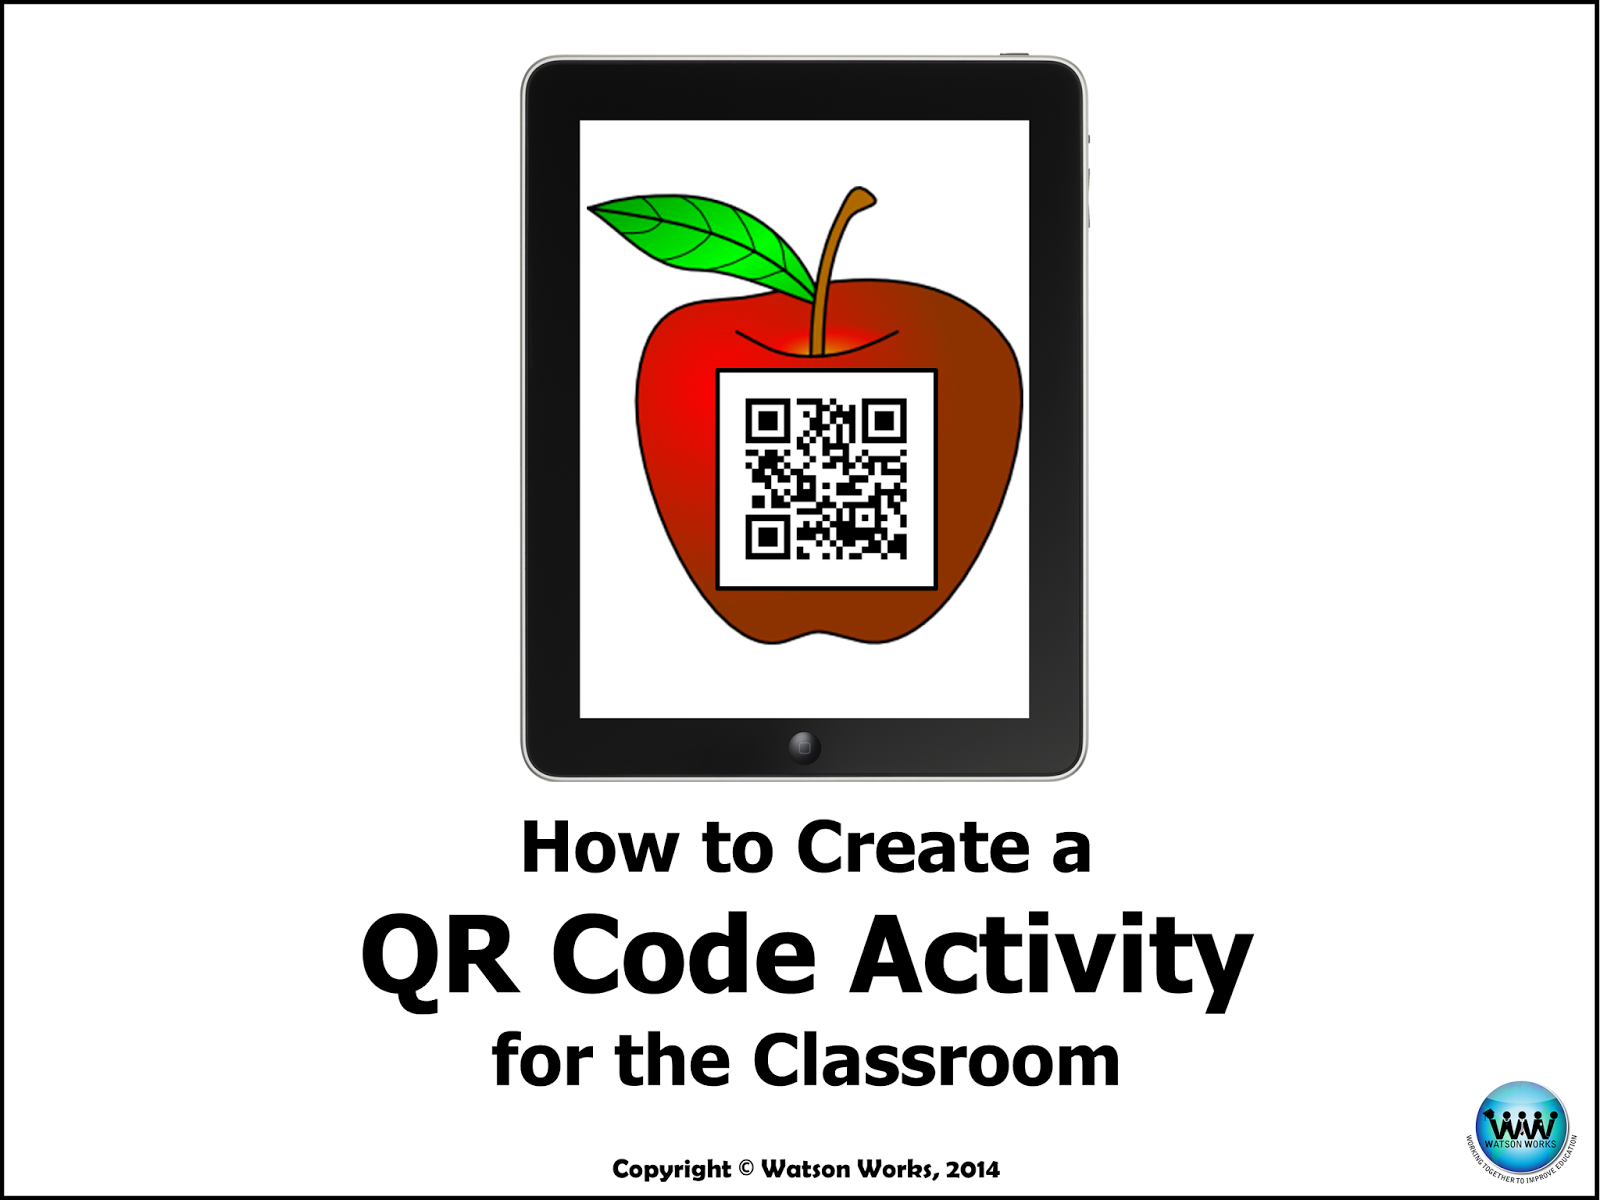 http://www.teacherspayteachers.com/Product/How-to-Create-a-QR-Code-Activity-for-the-Classroom-User-Guide-1519602